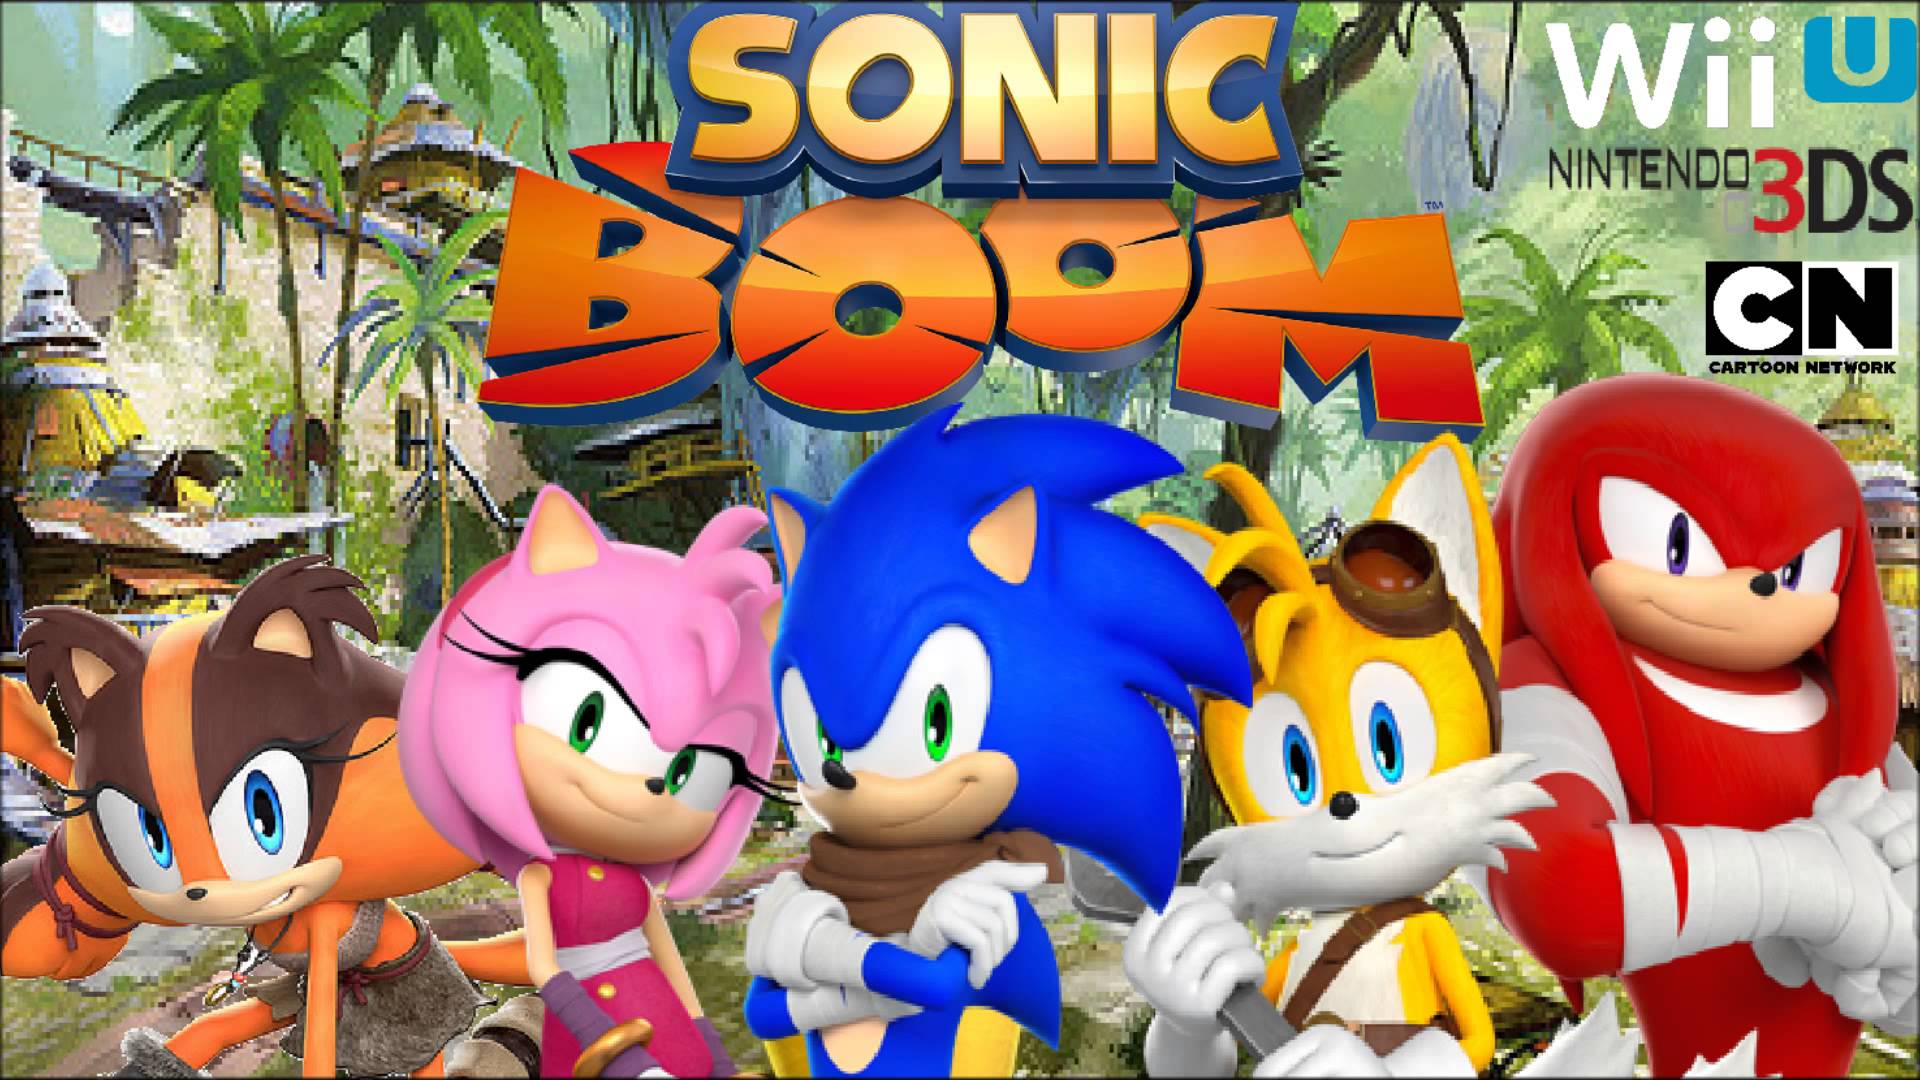 My Awesome Wallpaper for Sonic Boom